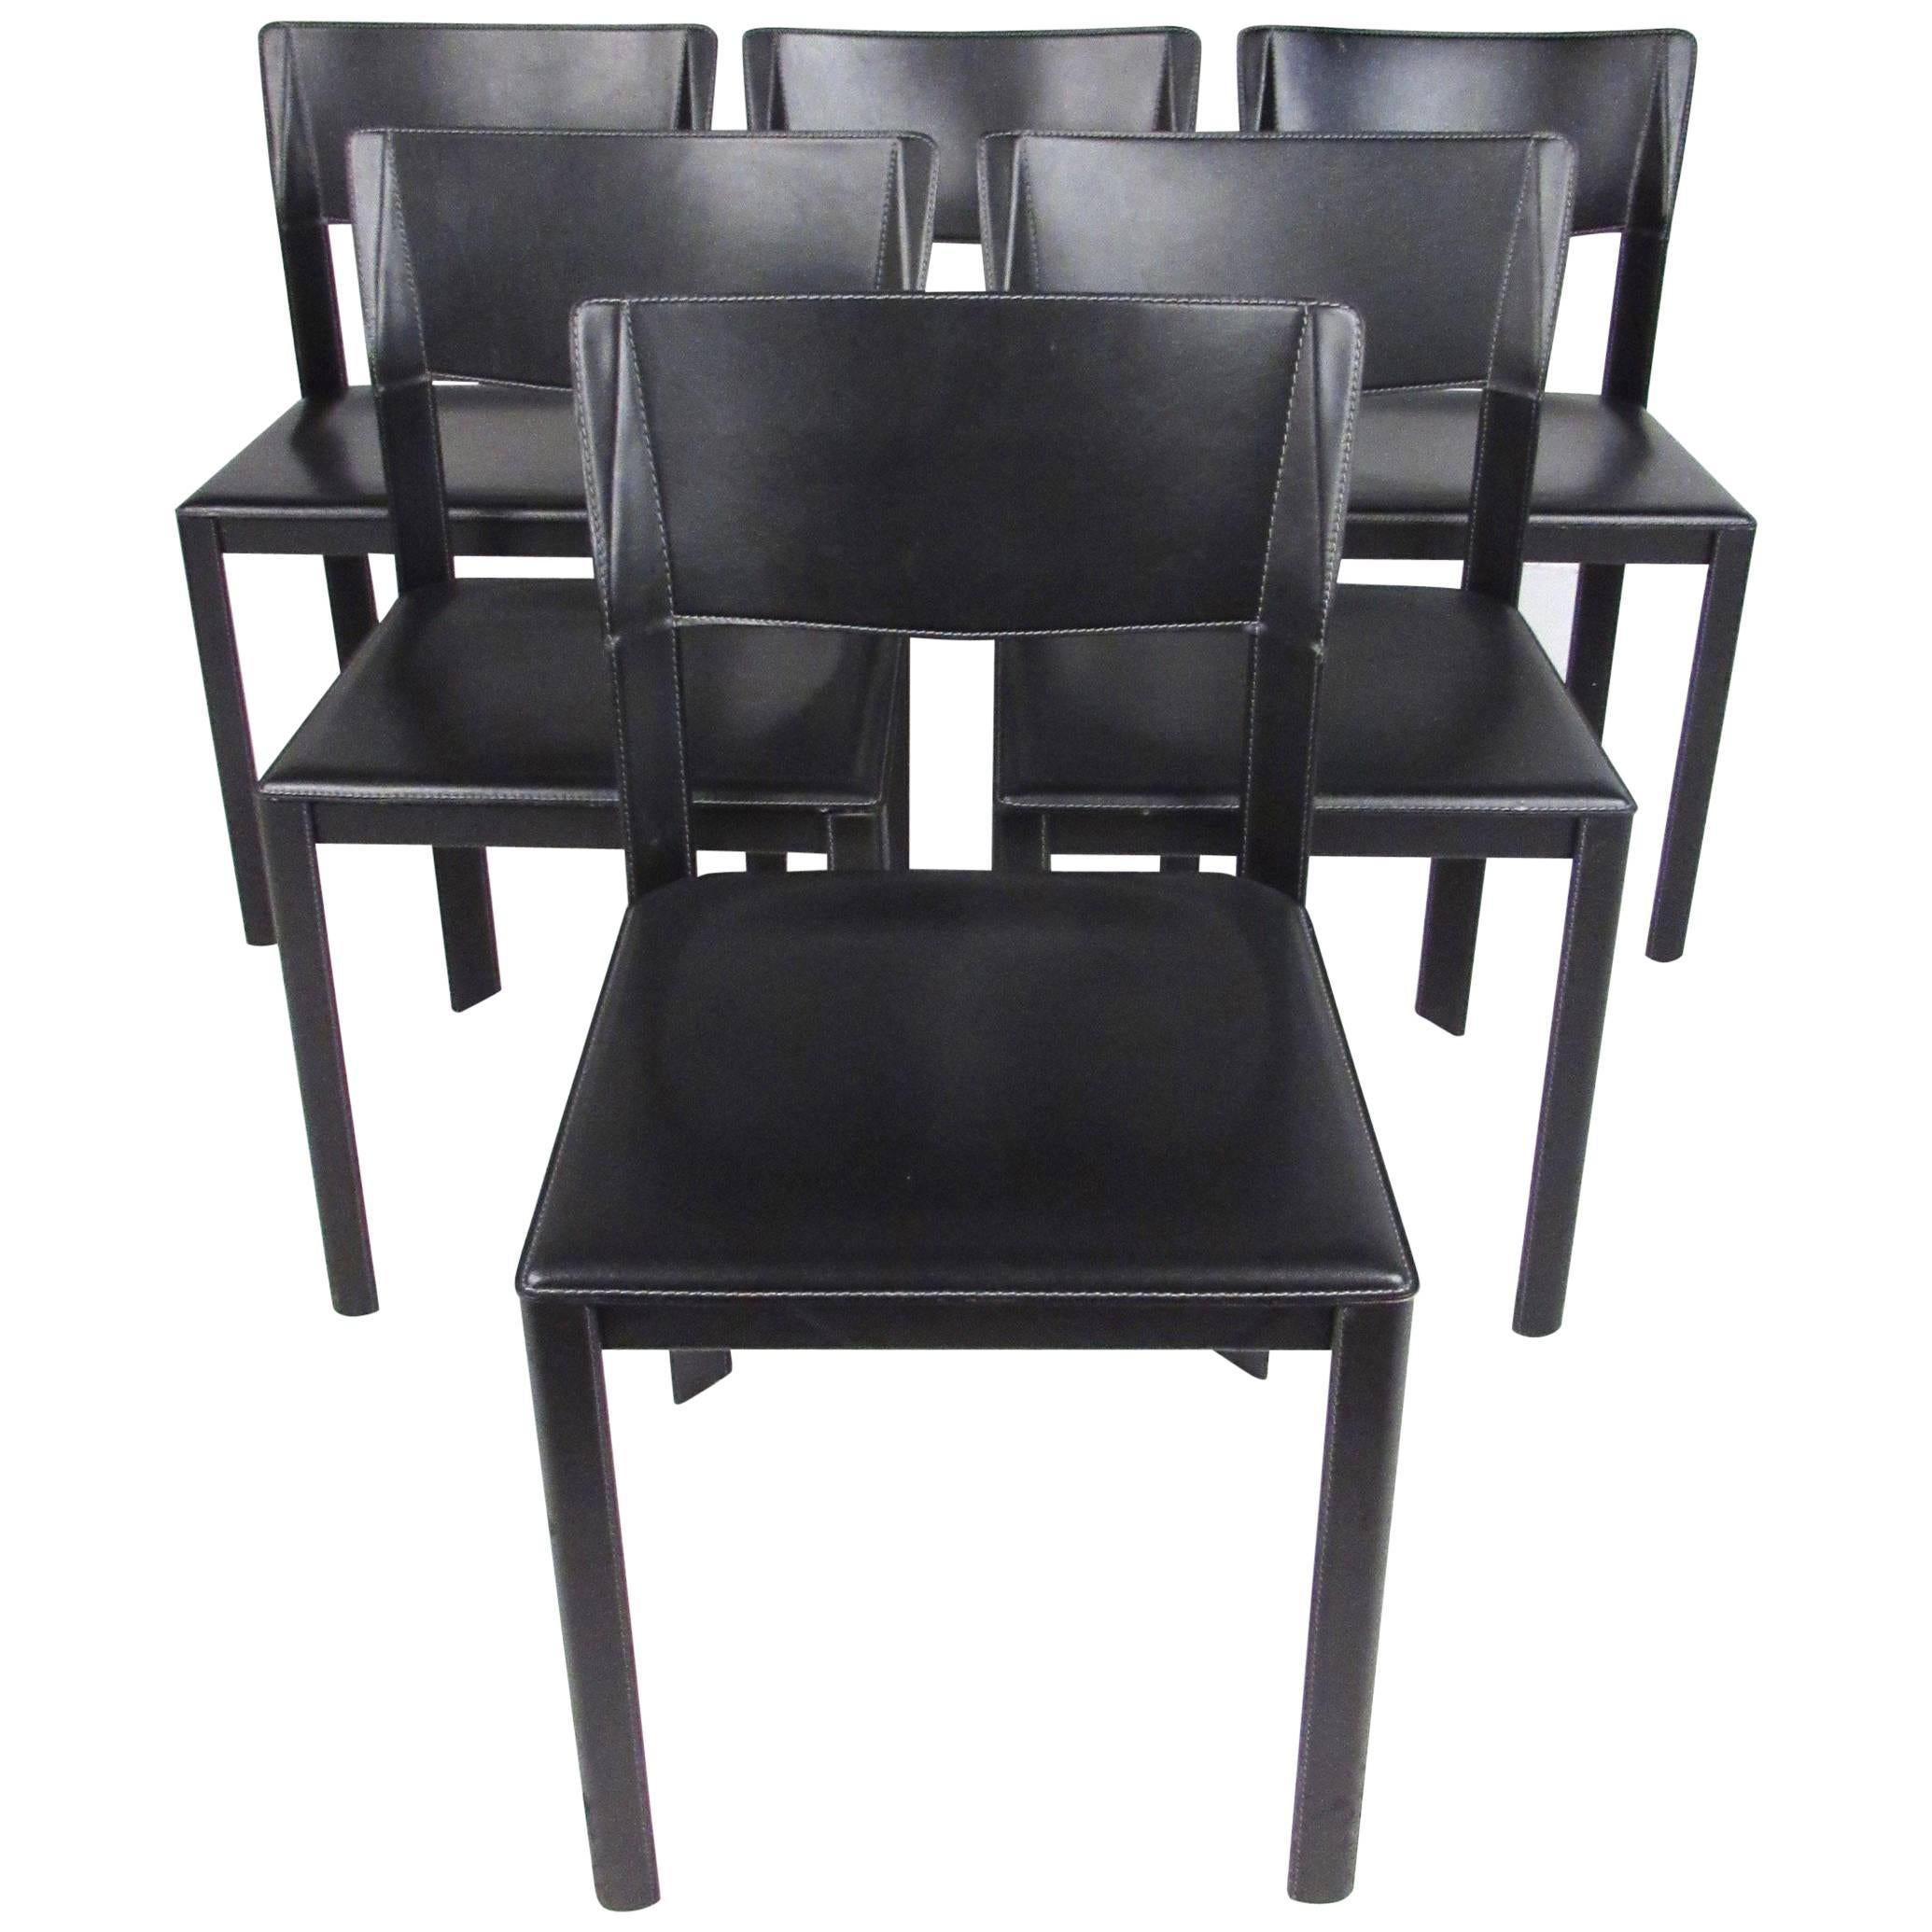 Set of Italian Modern Leather Dining Room Chairs